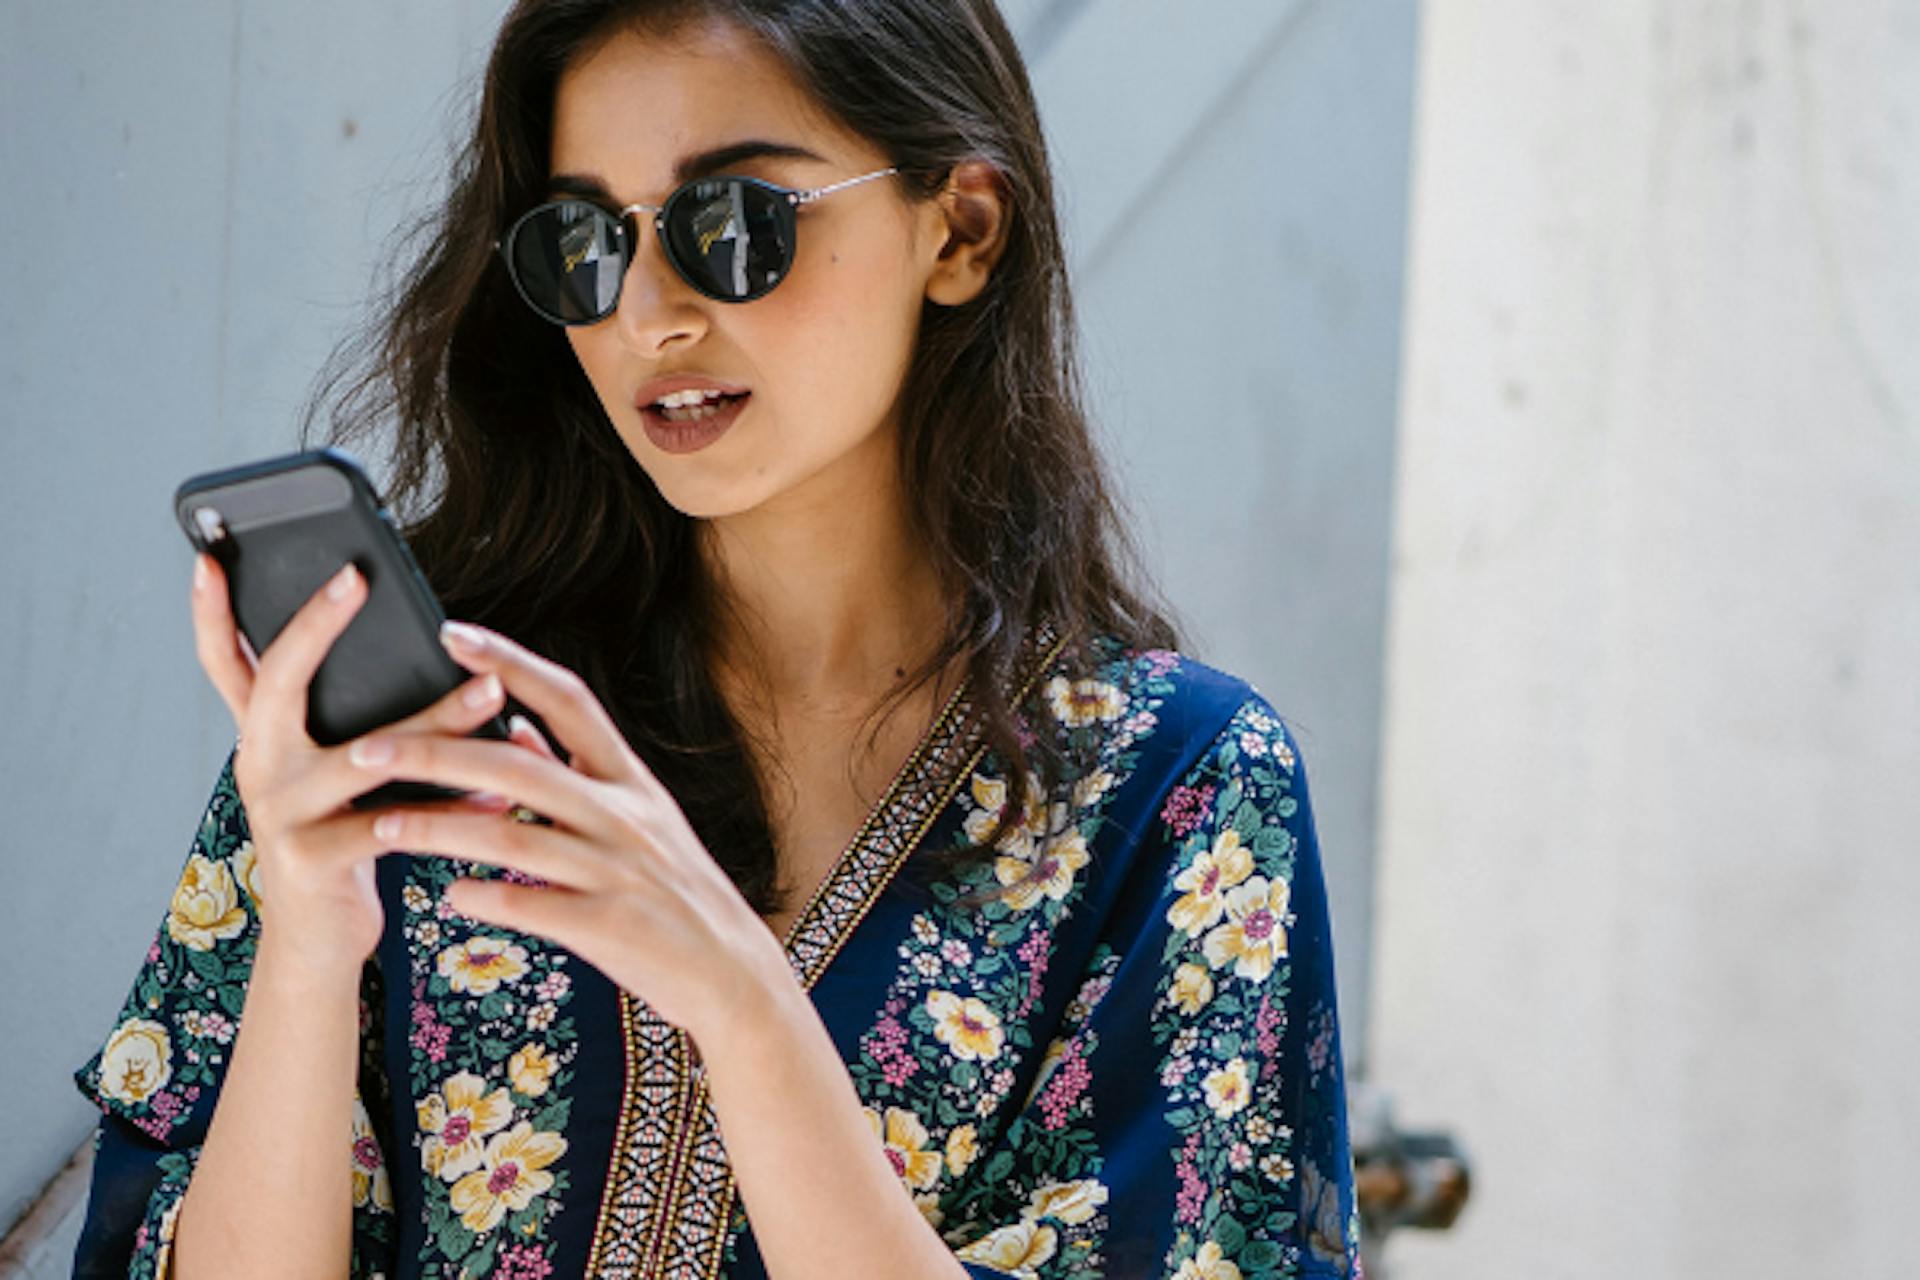 A woman in a colourful floral jacket playing on her phone. 